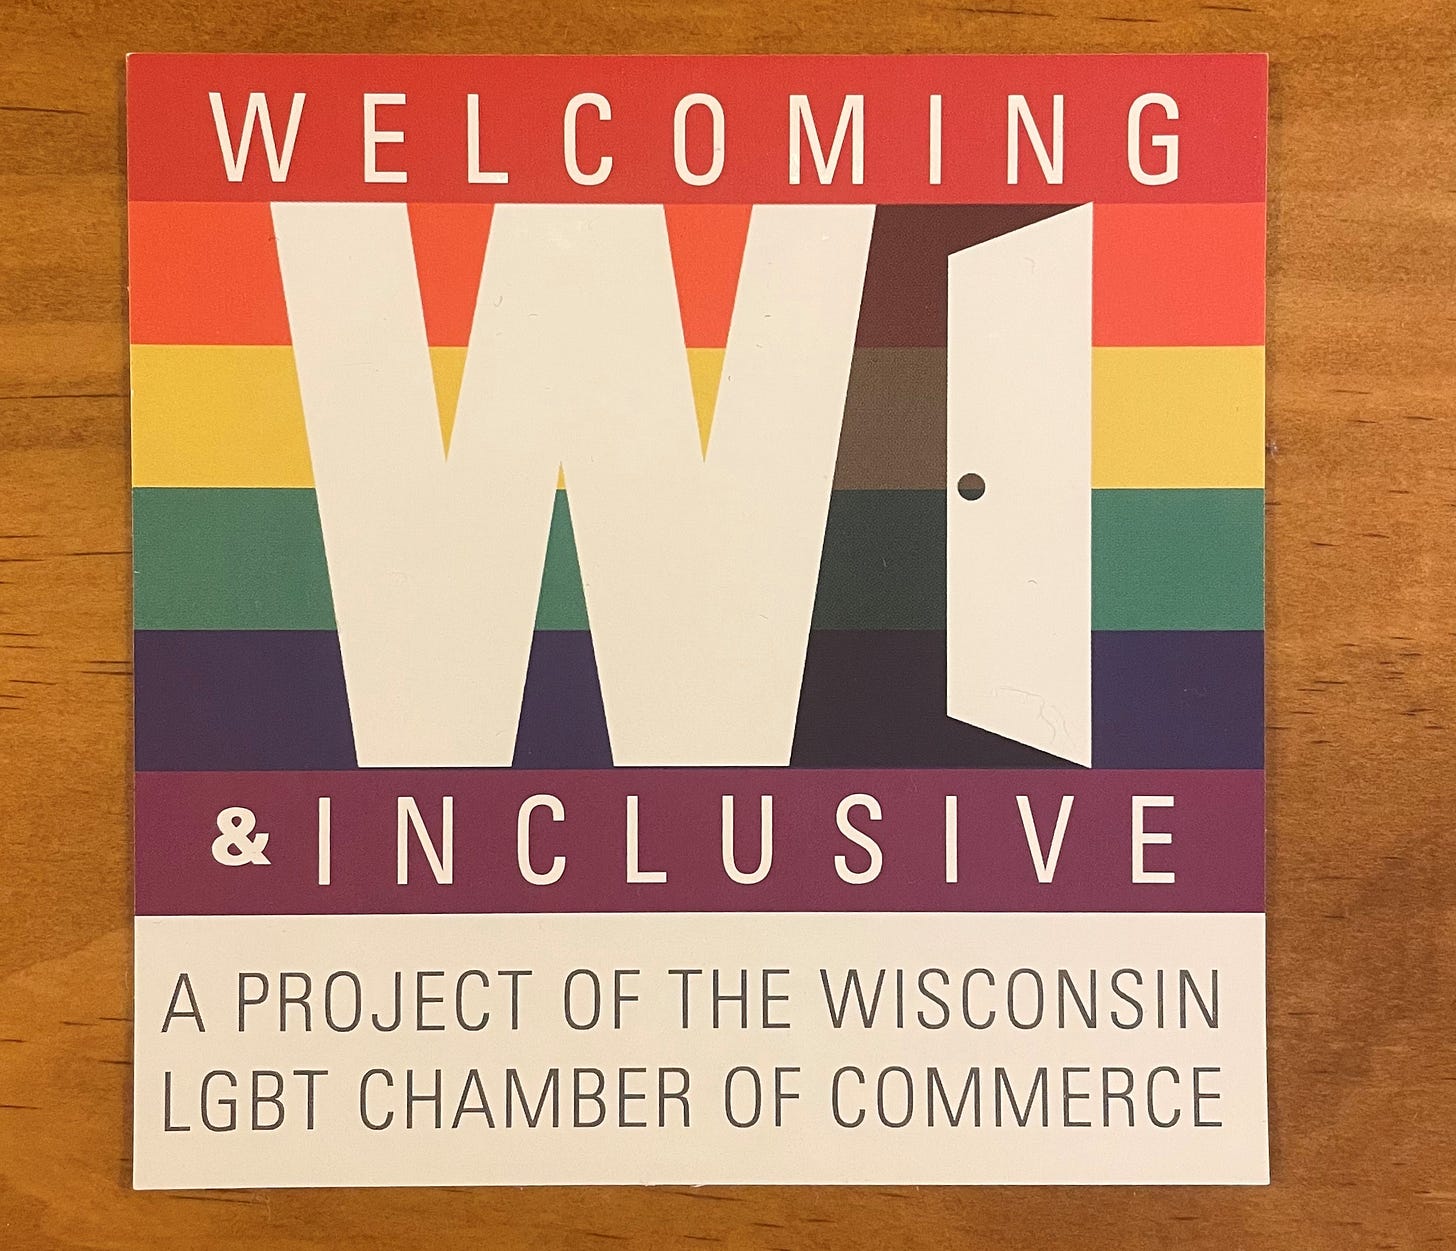 A Welcoming and Inclusive decal from the Wisconsin LGBT Chamber of Commerce. The image is described in the article text.